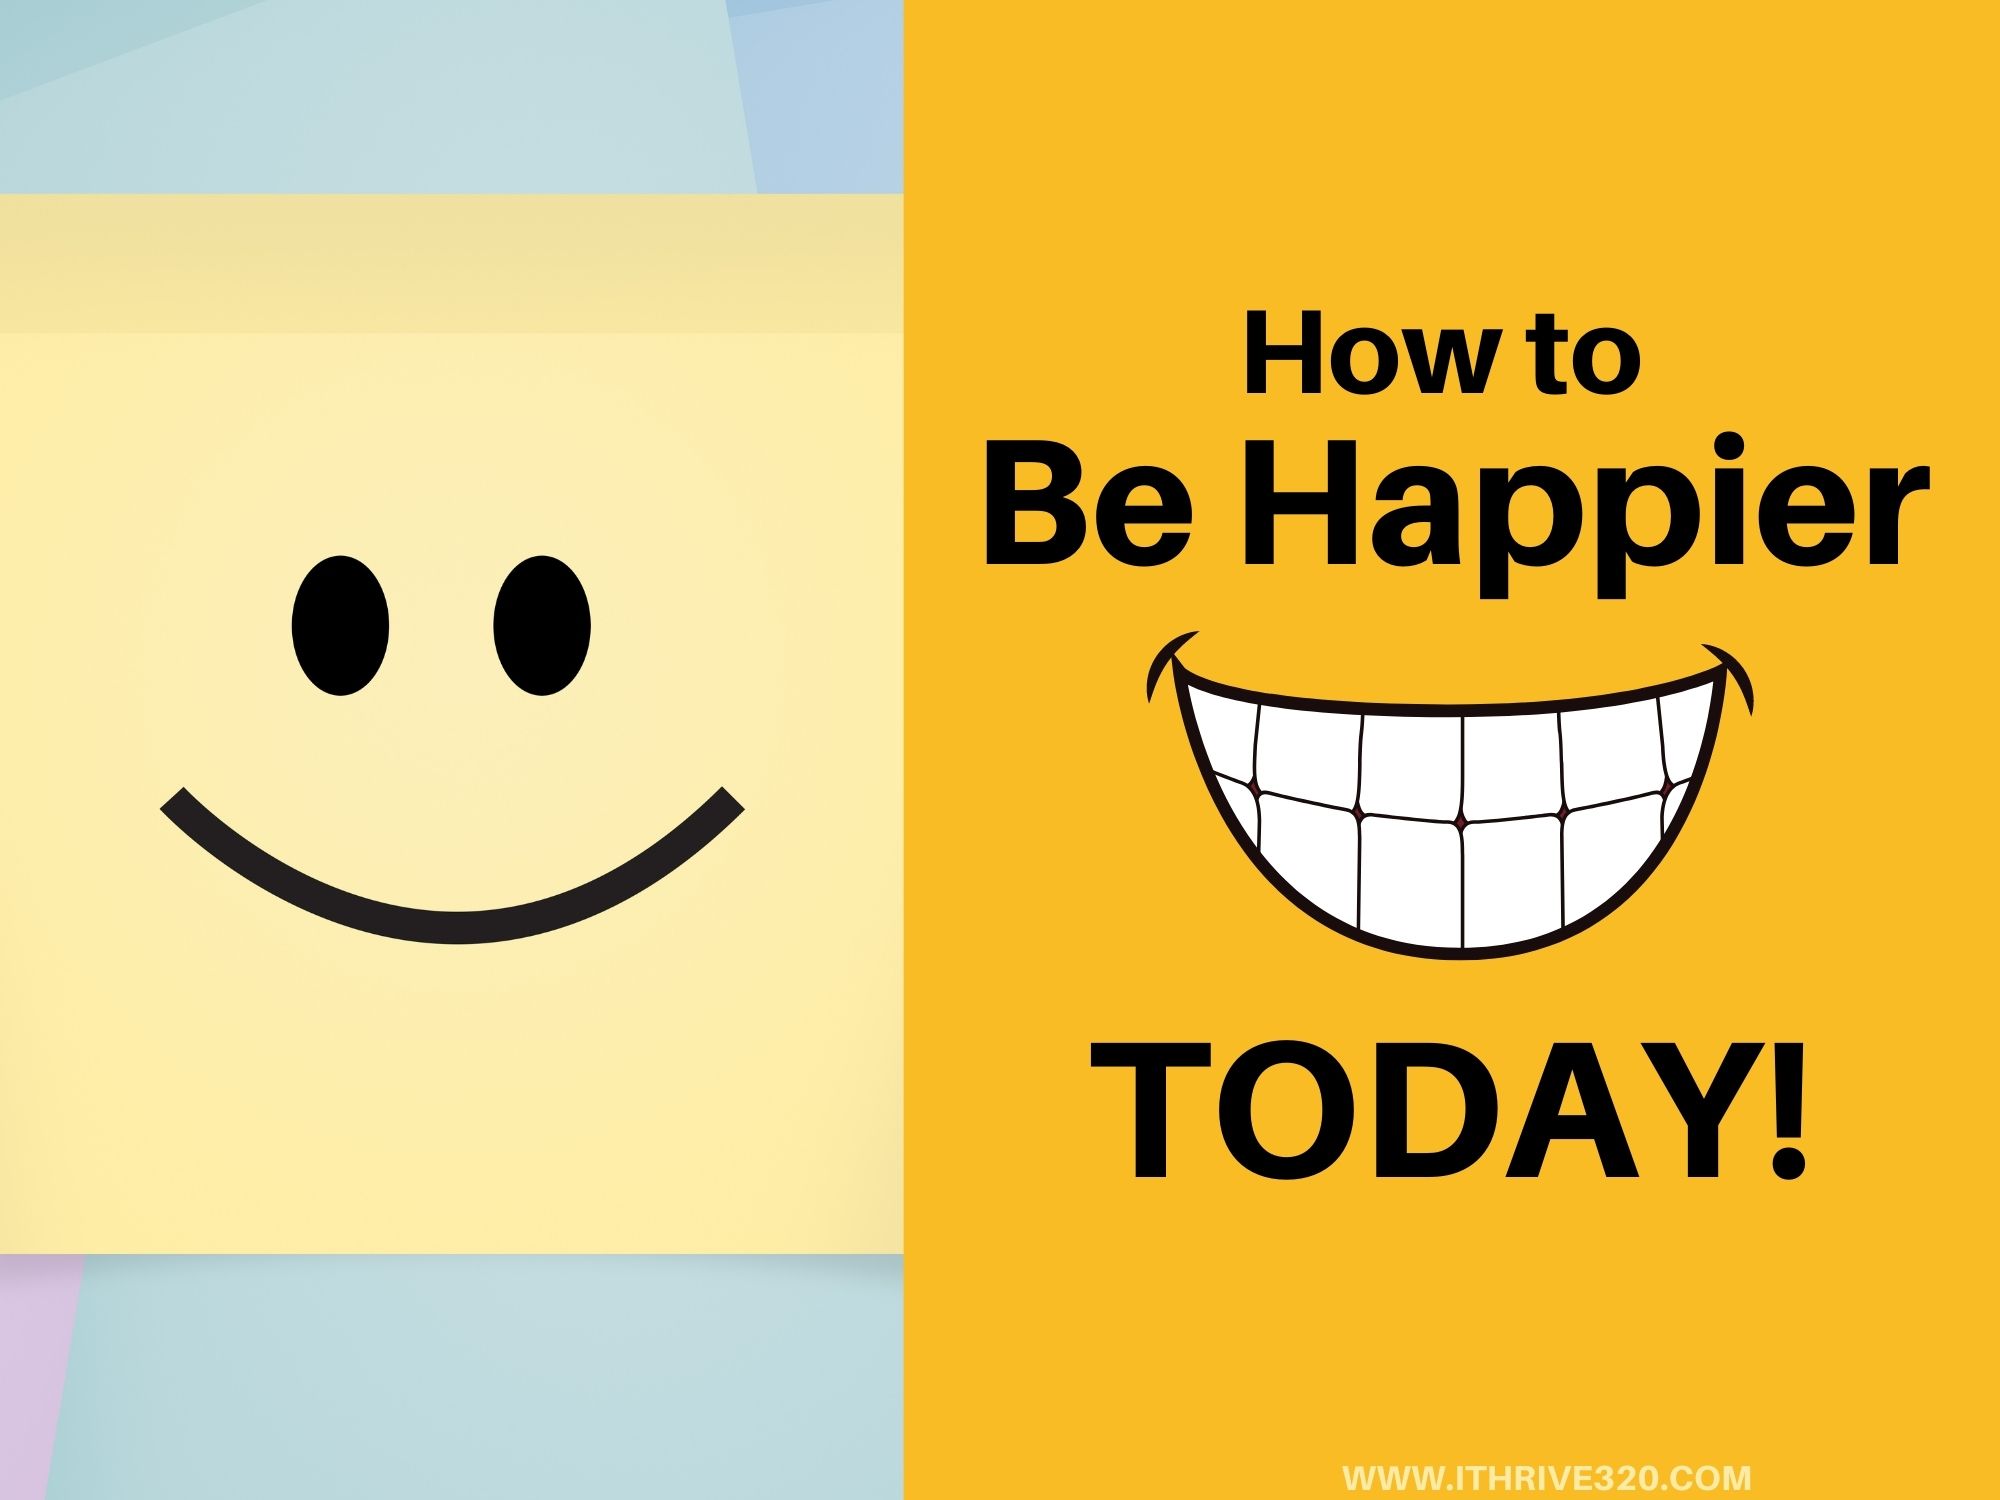 How to Be Happier Today - Happiness Tips